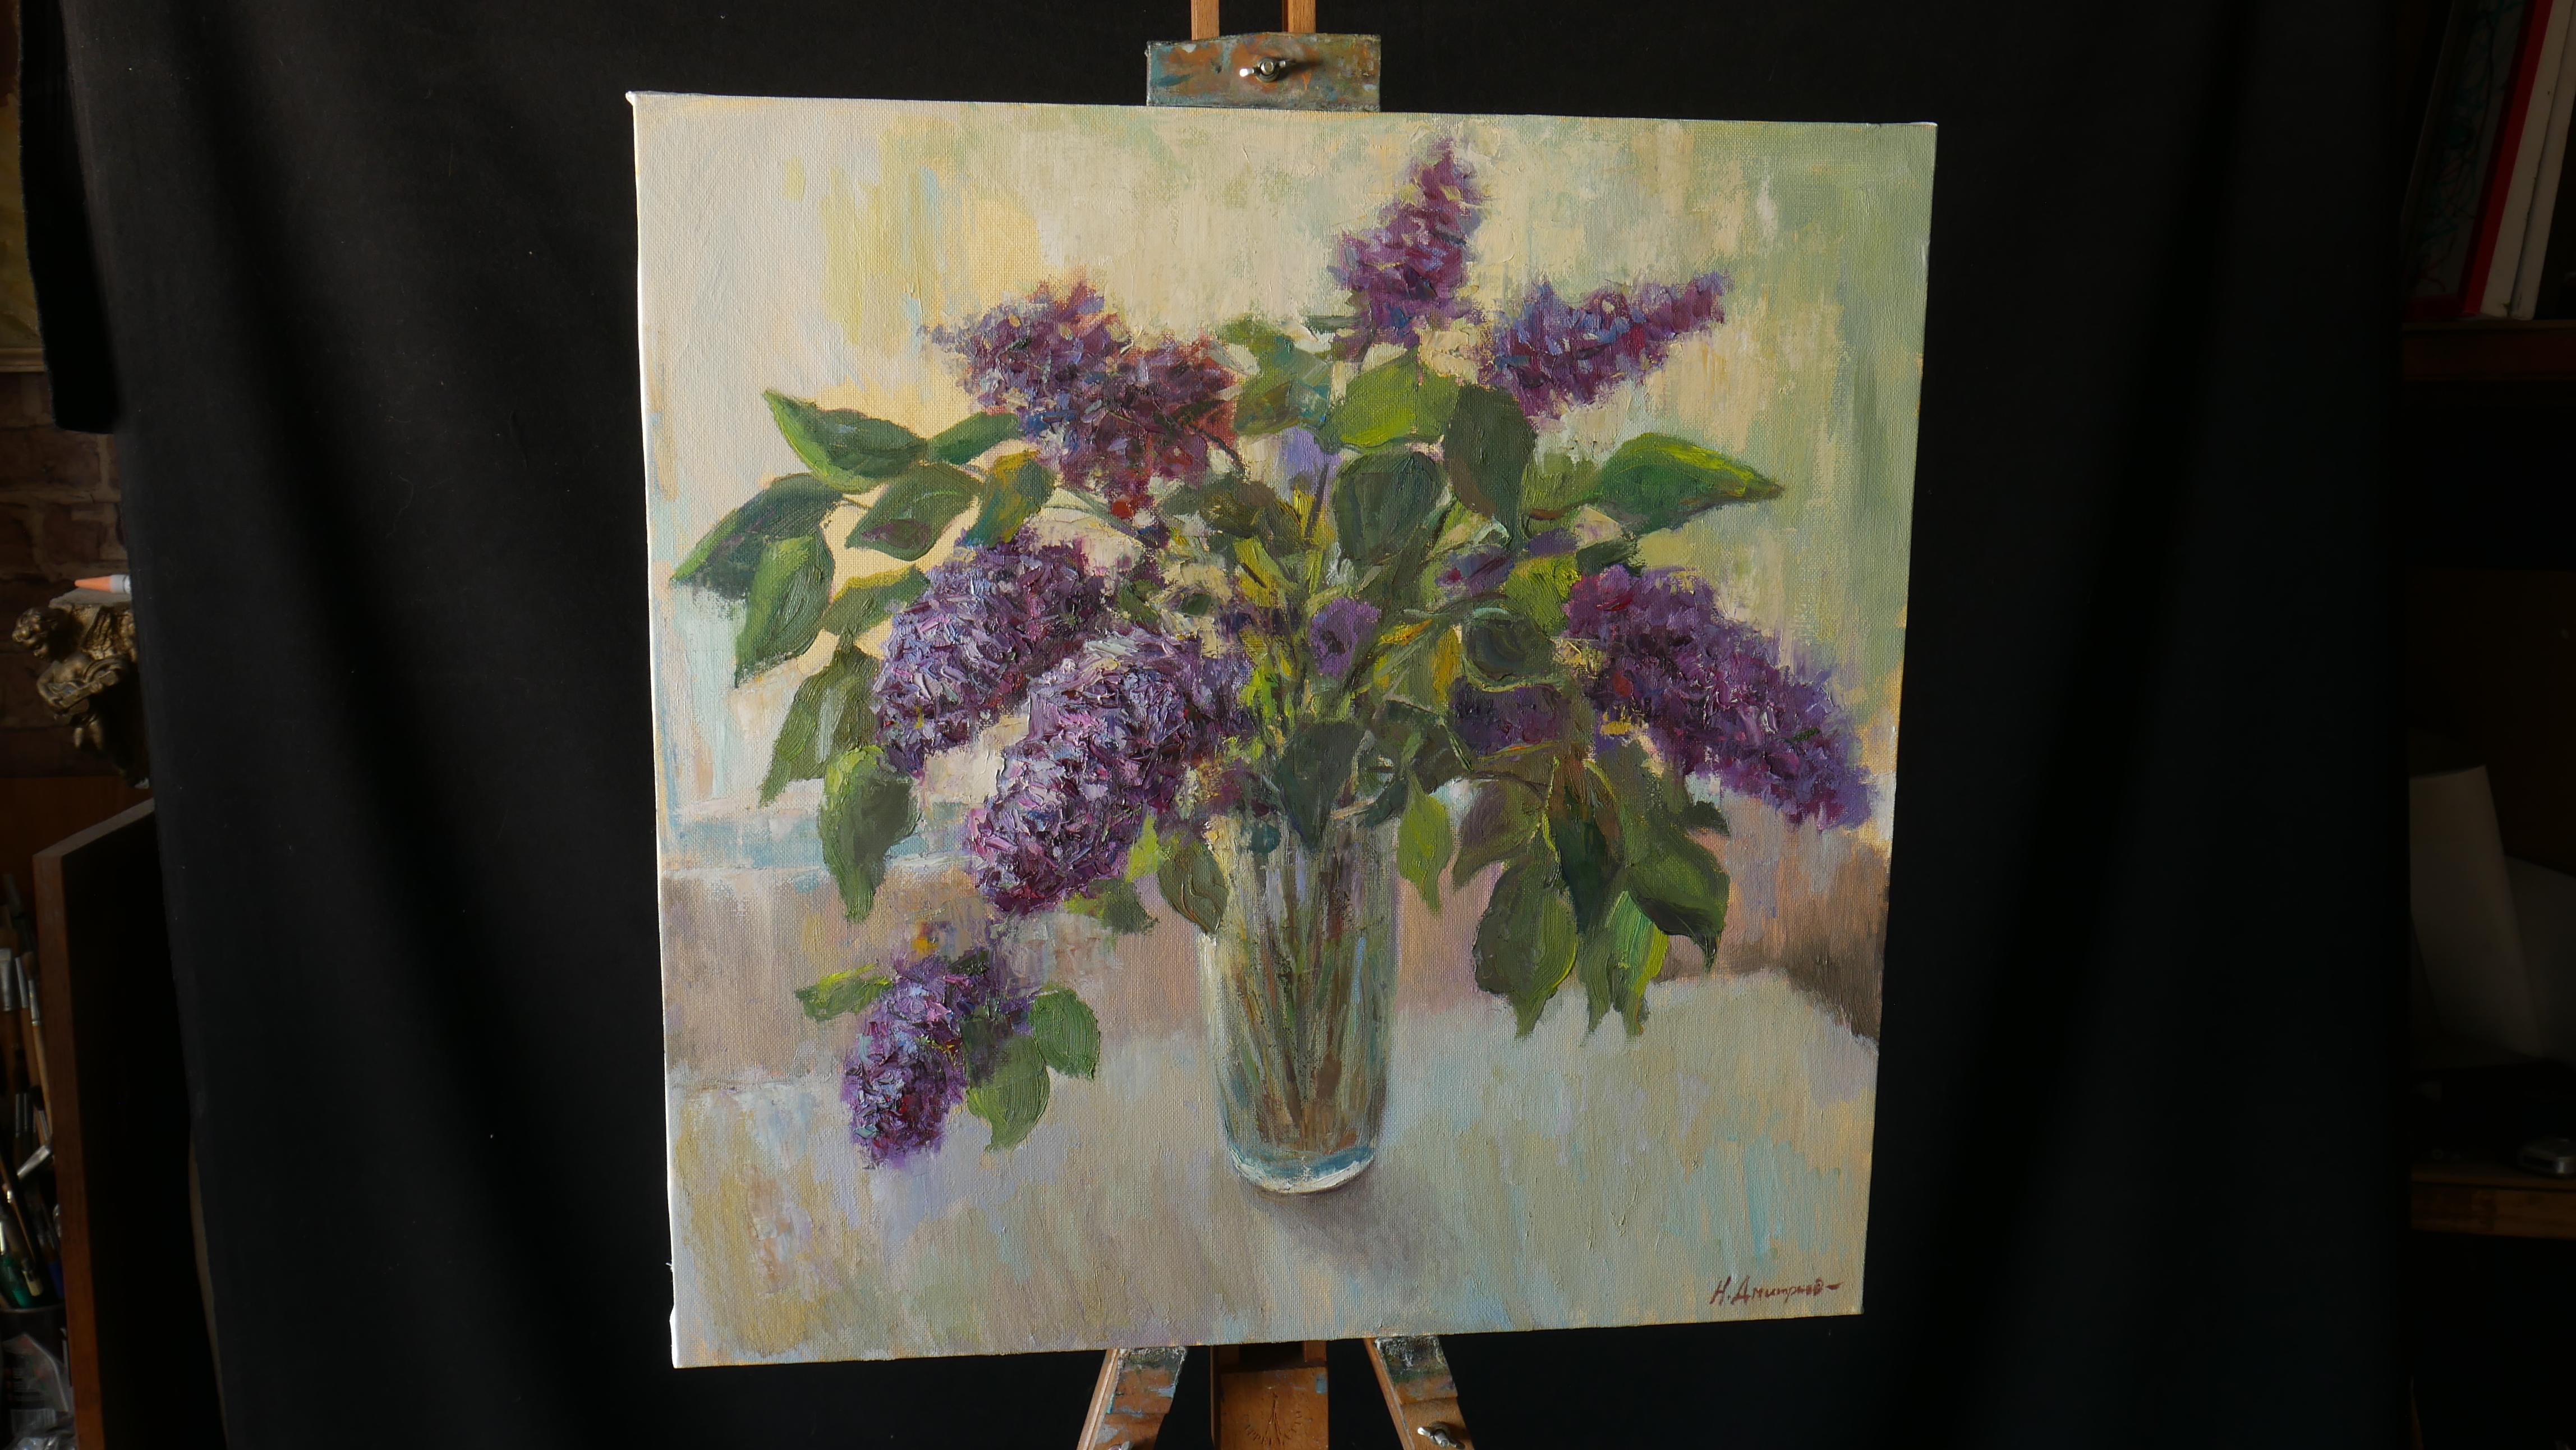 The Bouquet Of Lilacs Near the Light Window - floral still life, oil painting - Impressionist Painting by Nikolay Dmitriev